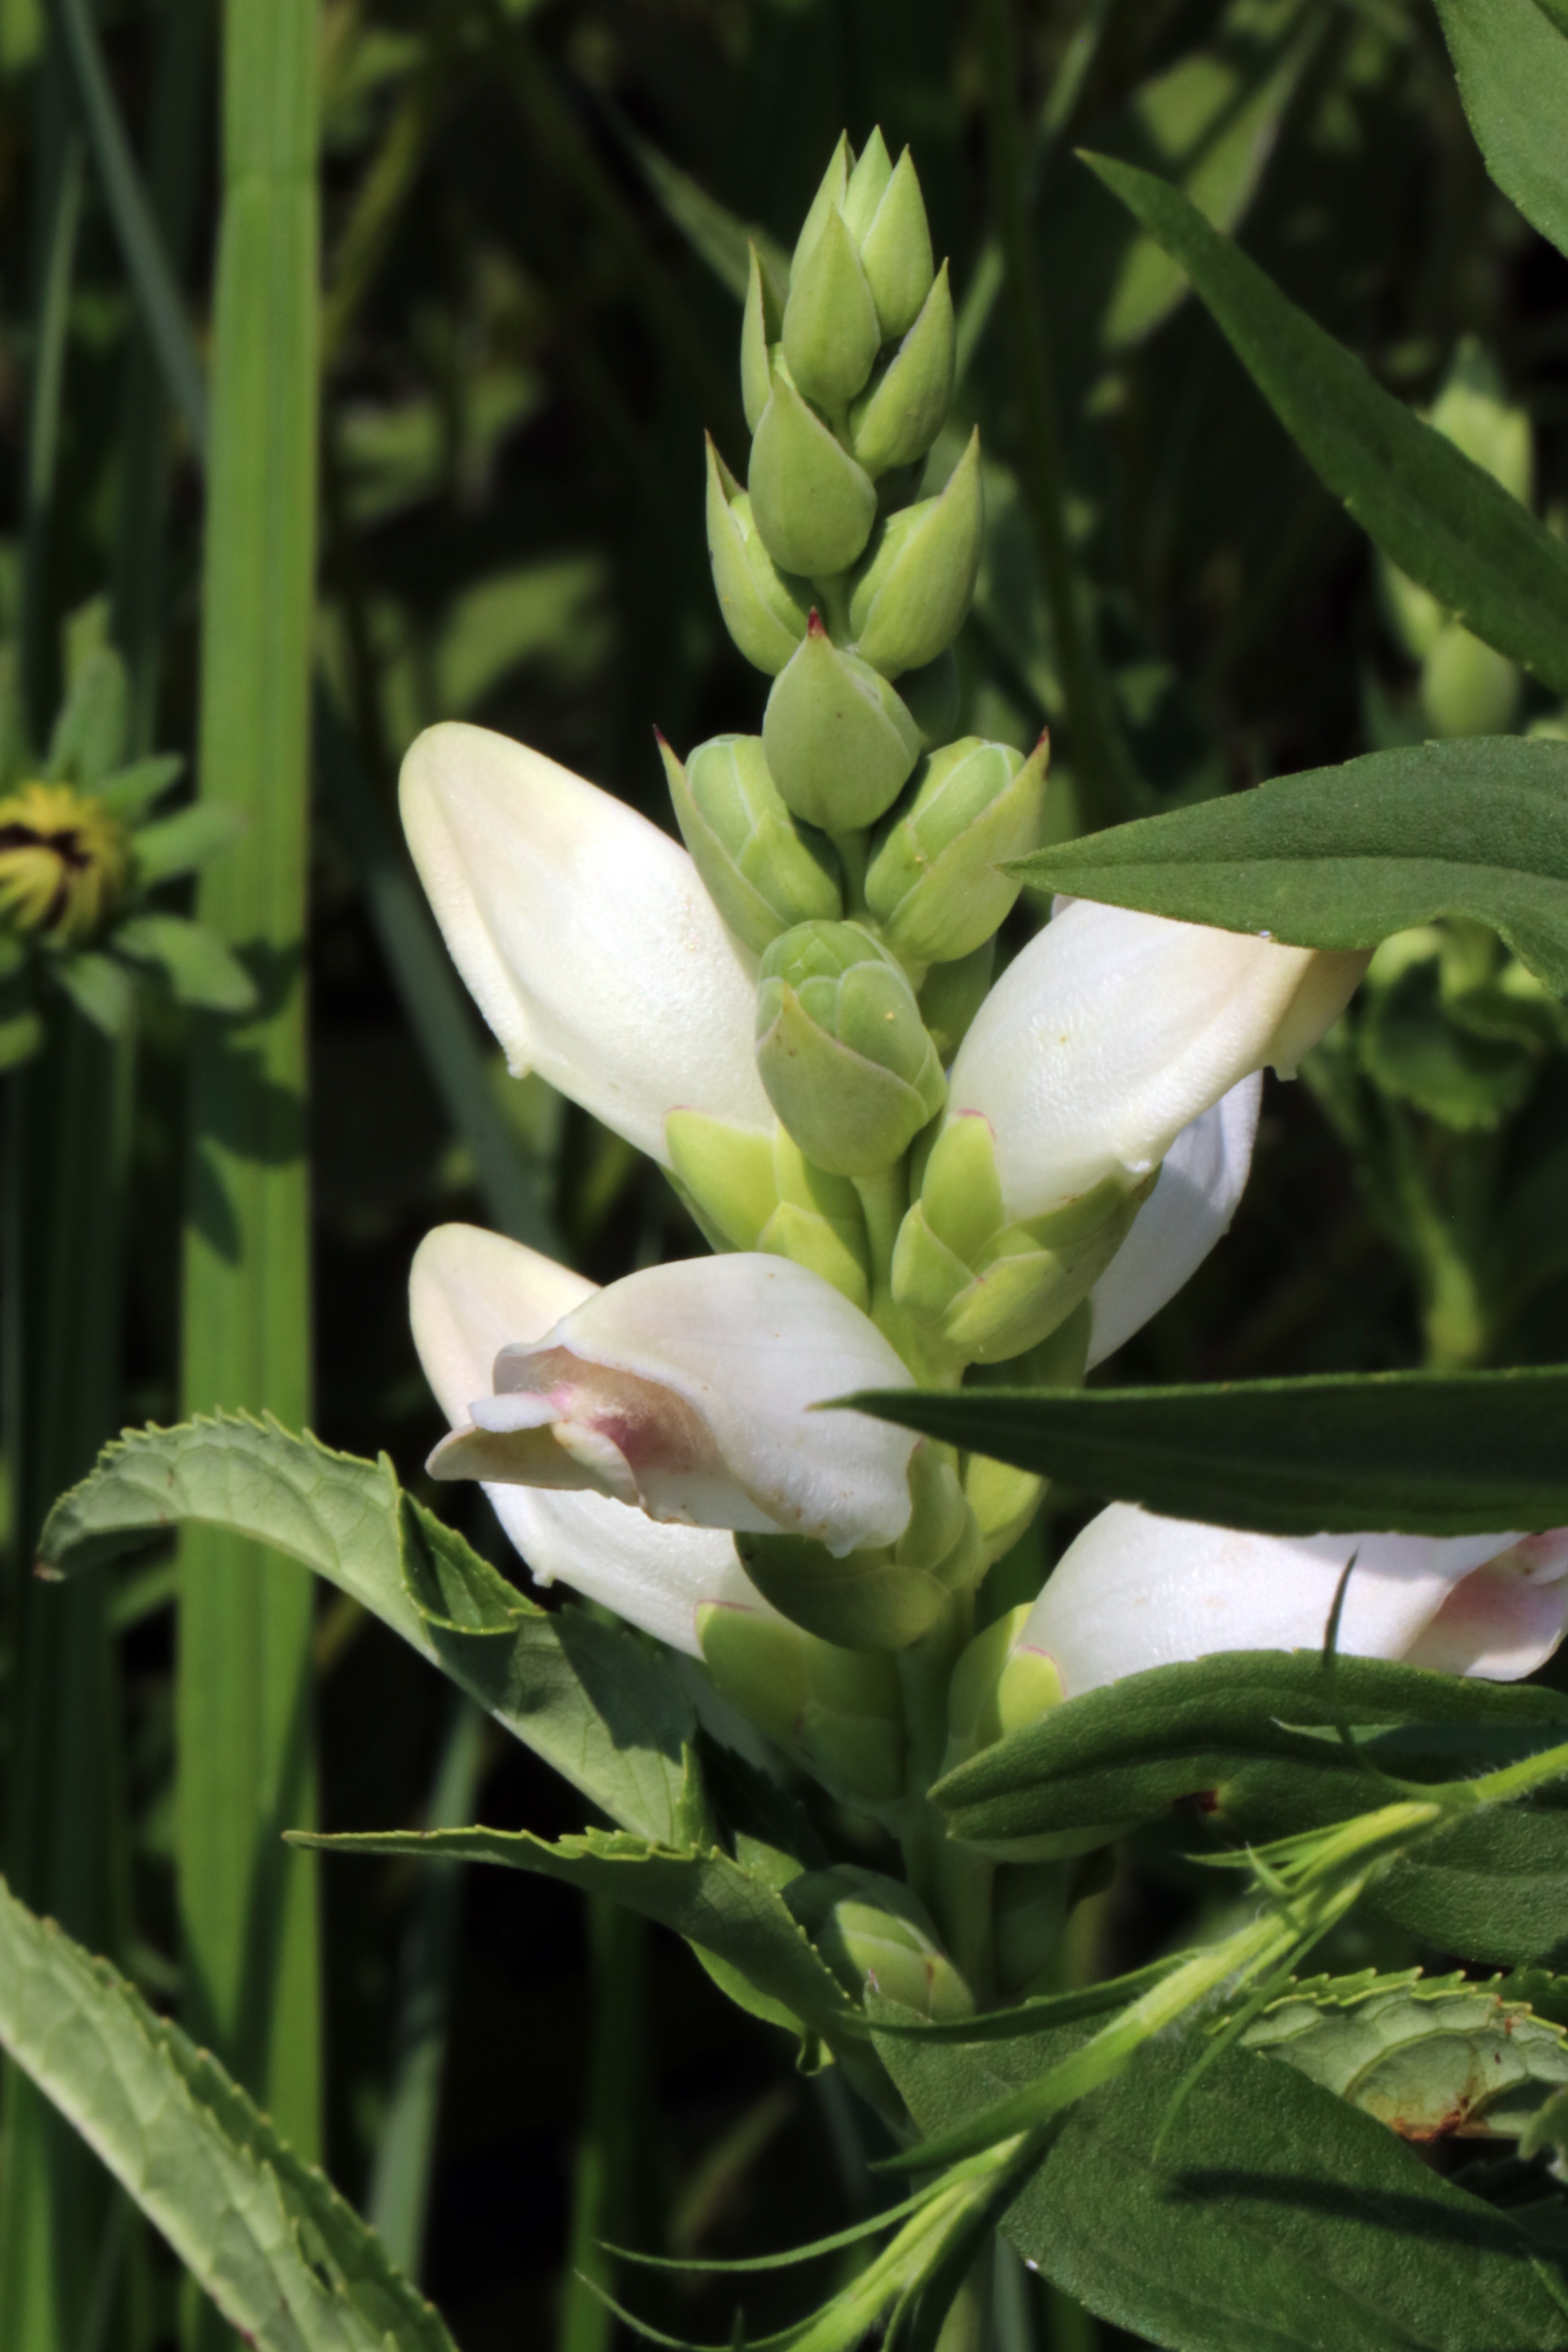 Light green buds on top of white turtlehead blooms.